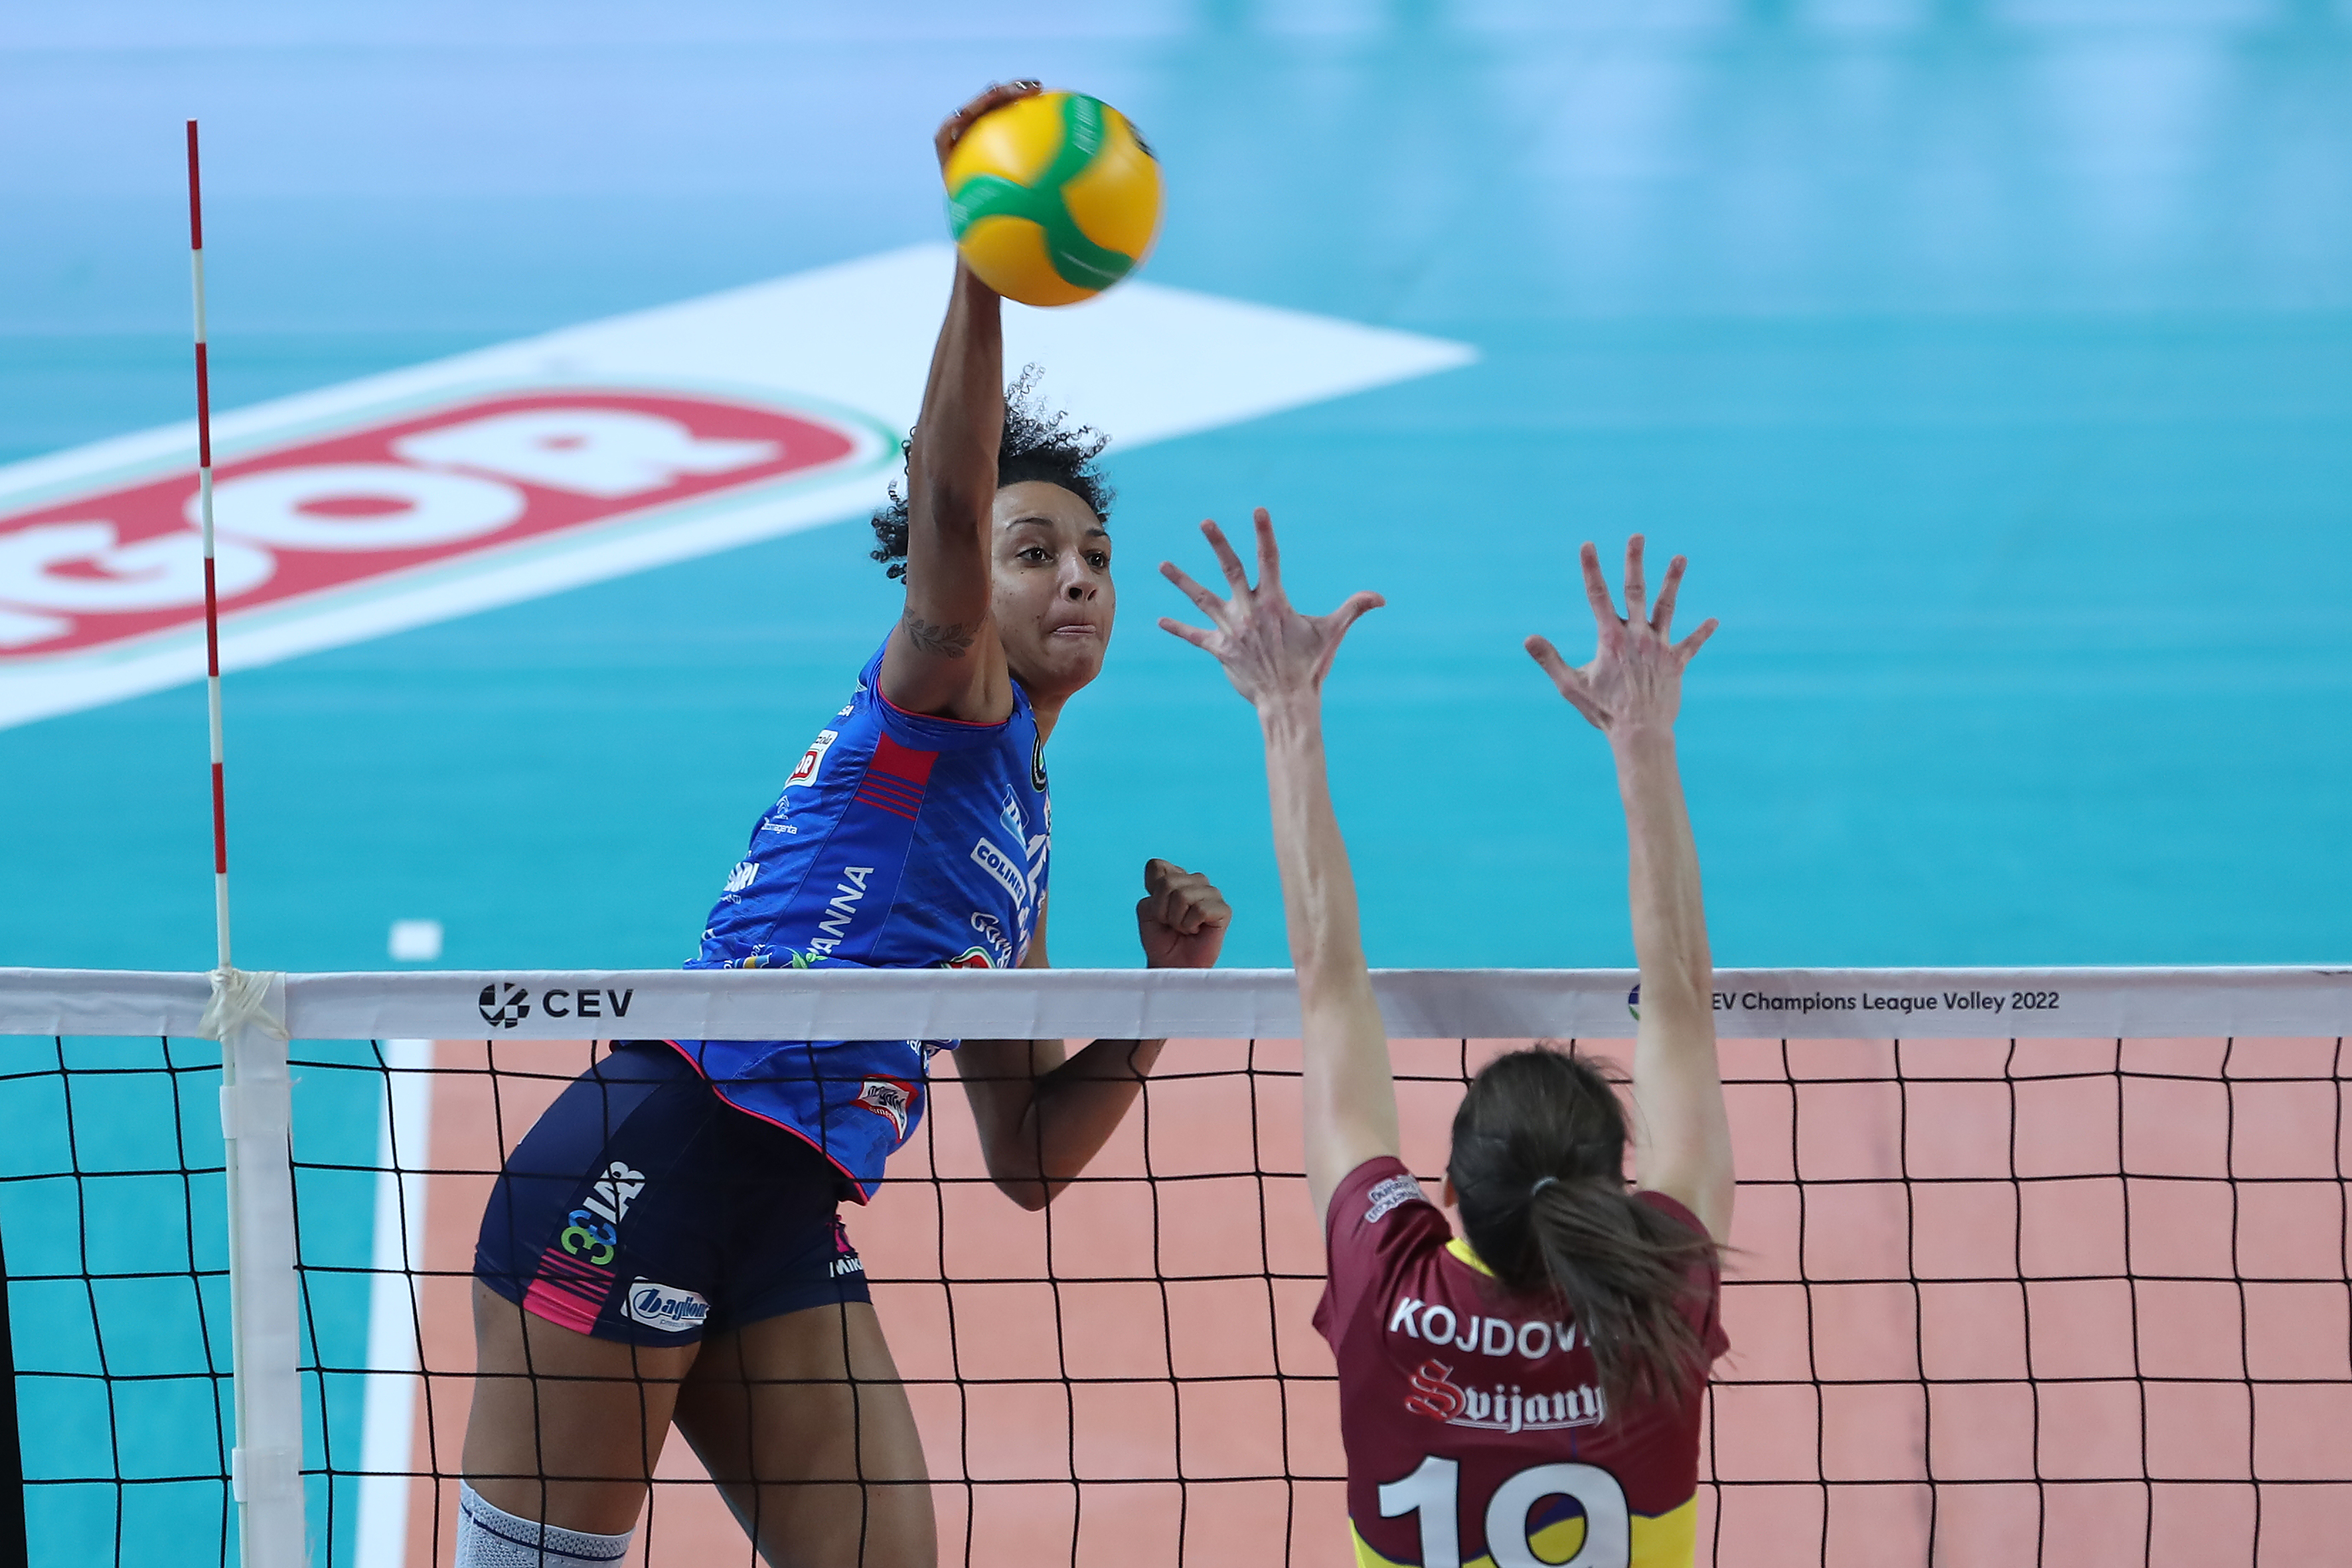 Liberec defeated by Pool leader Novara in CEV Champions League